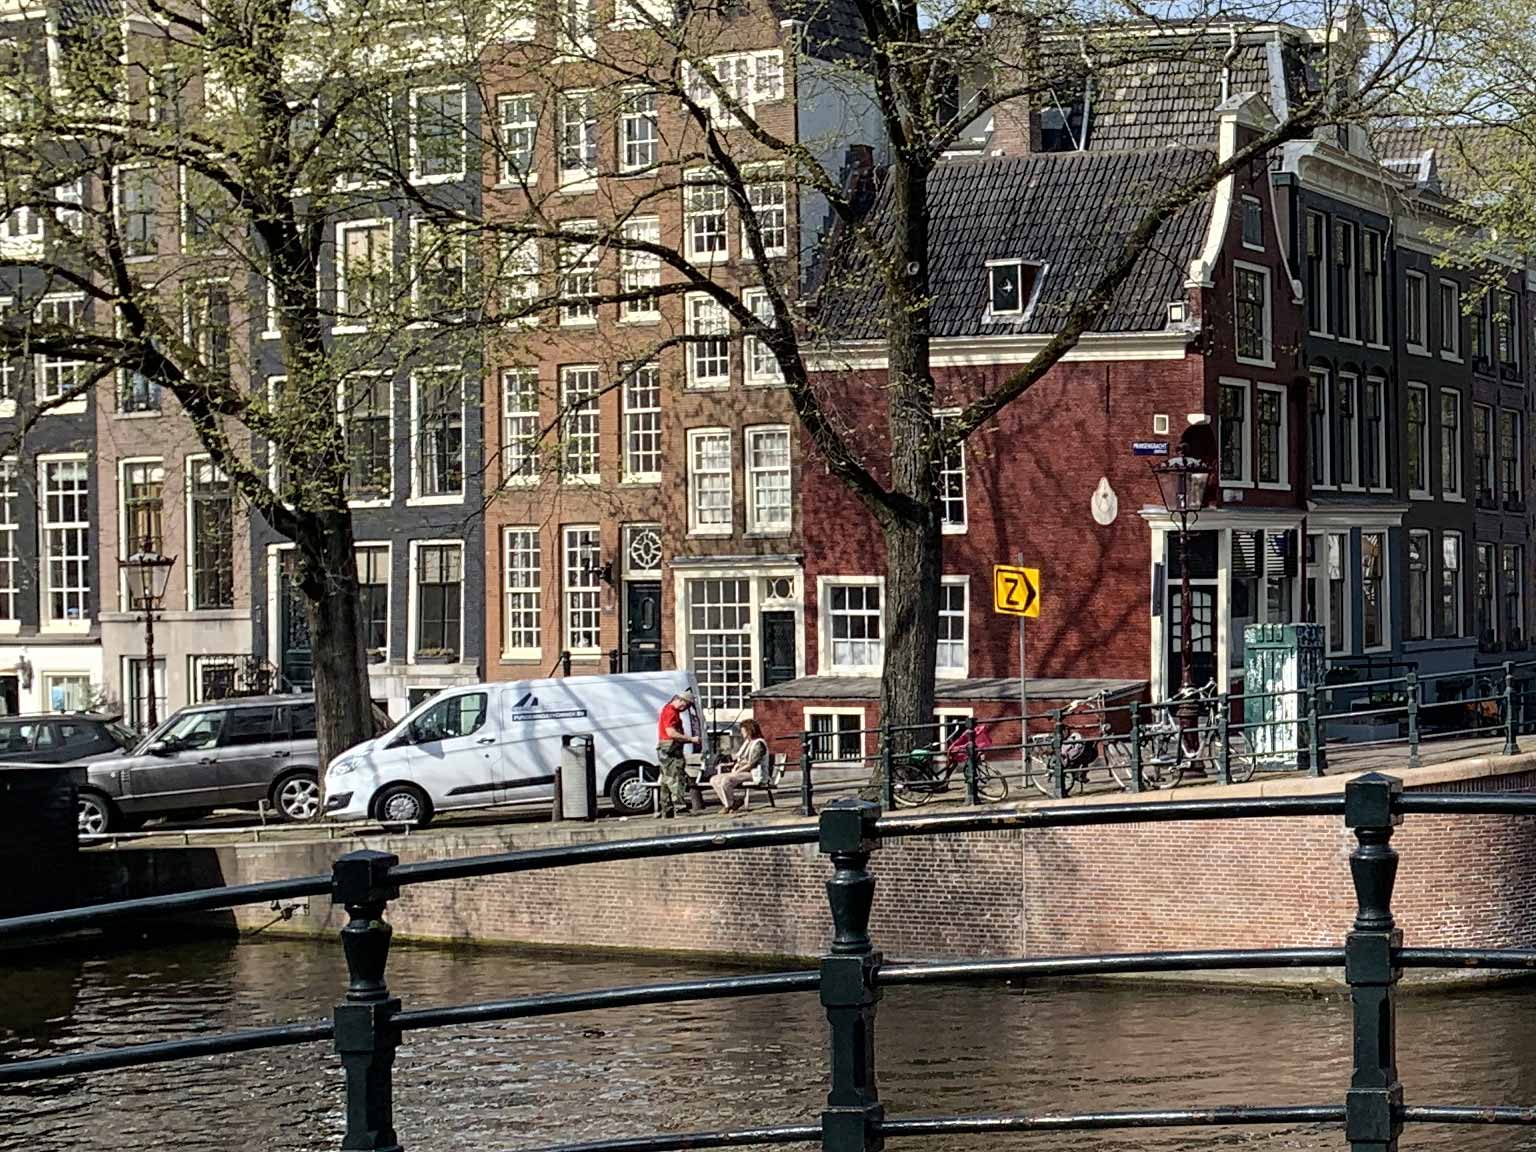 View from across the Prinsengracht of the red House with the Stork, Amsterdam